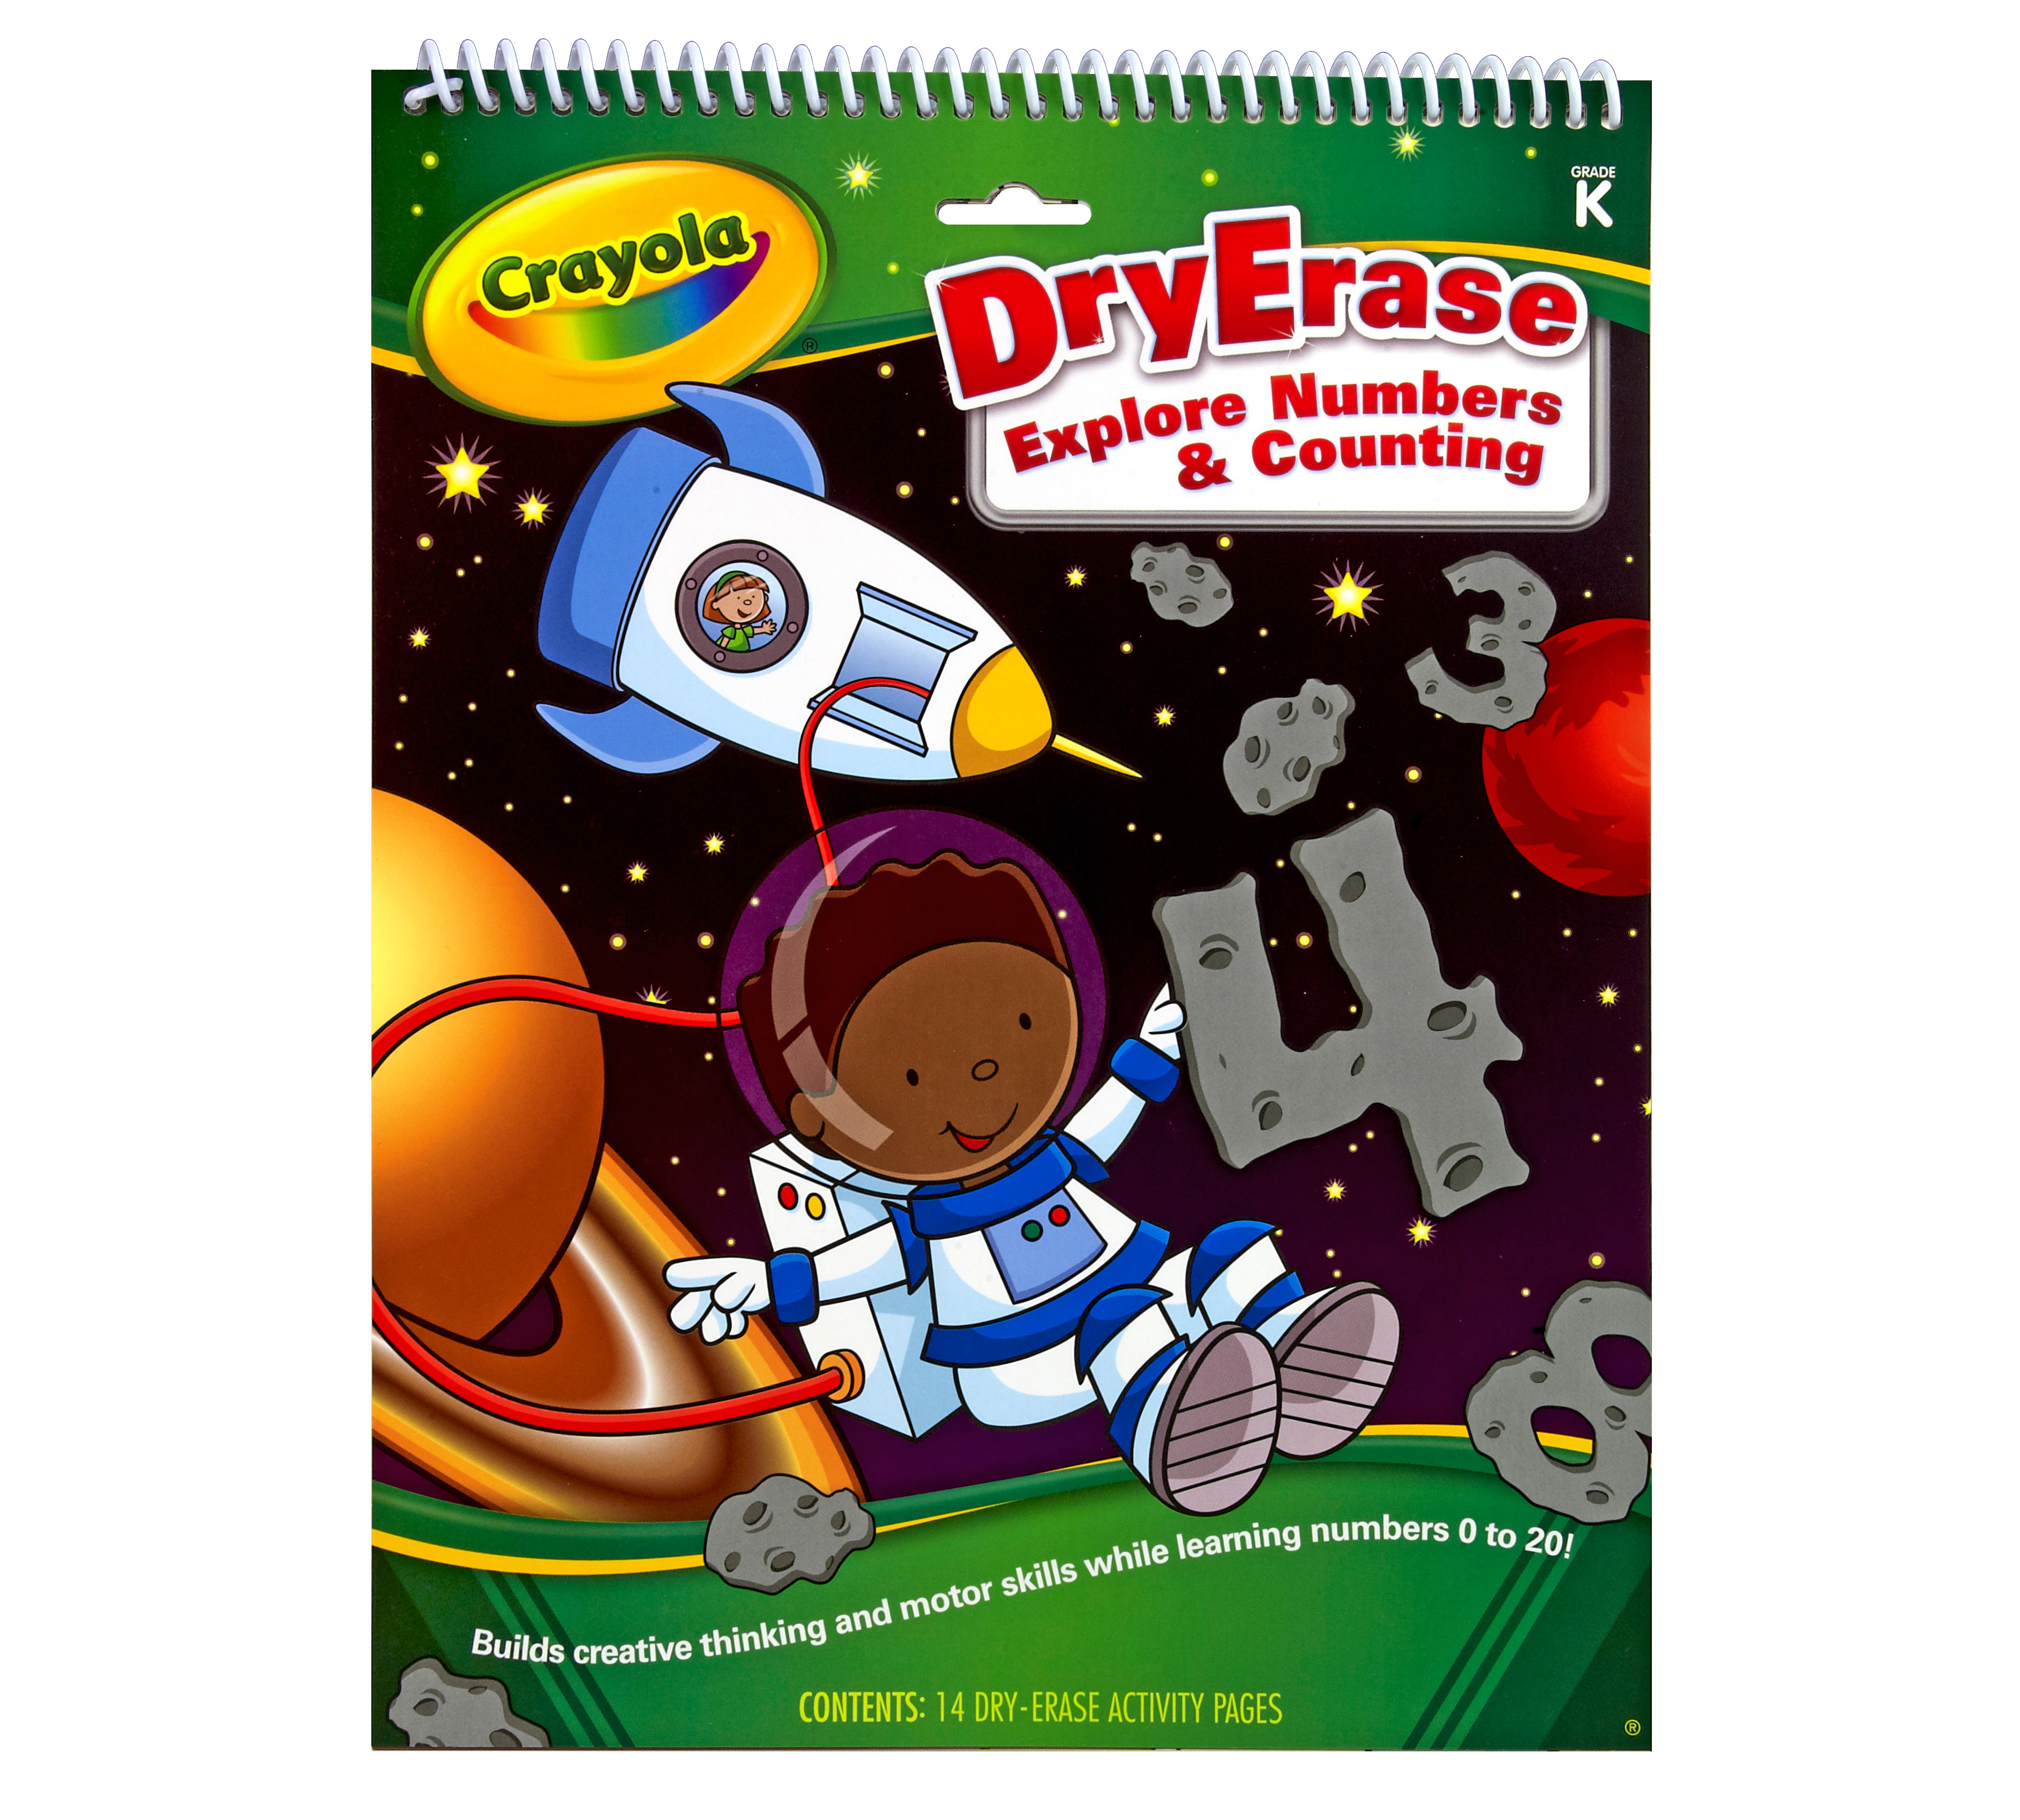 Download 102+ Products Dryerase Activity Tablet Explore Numbers